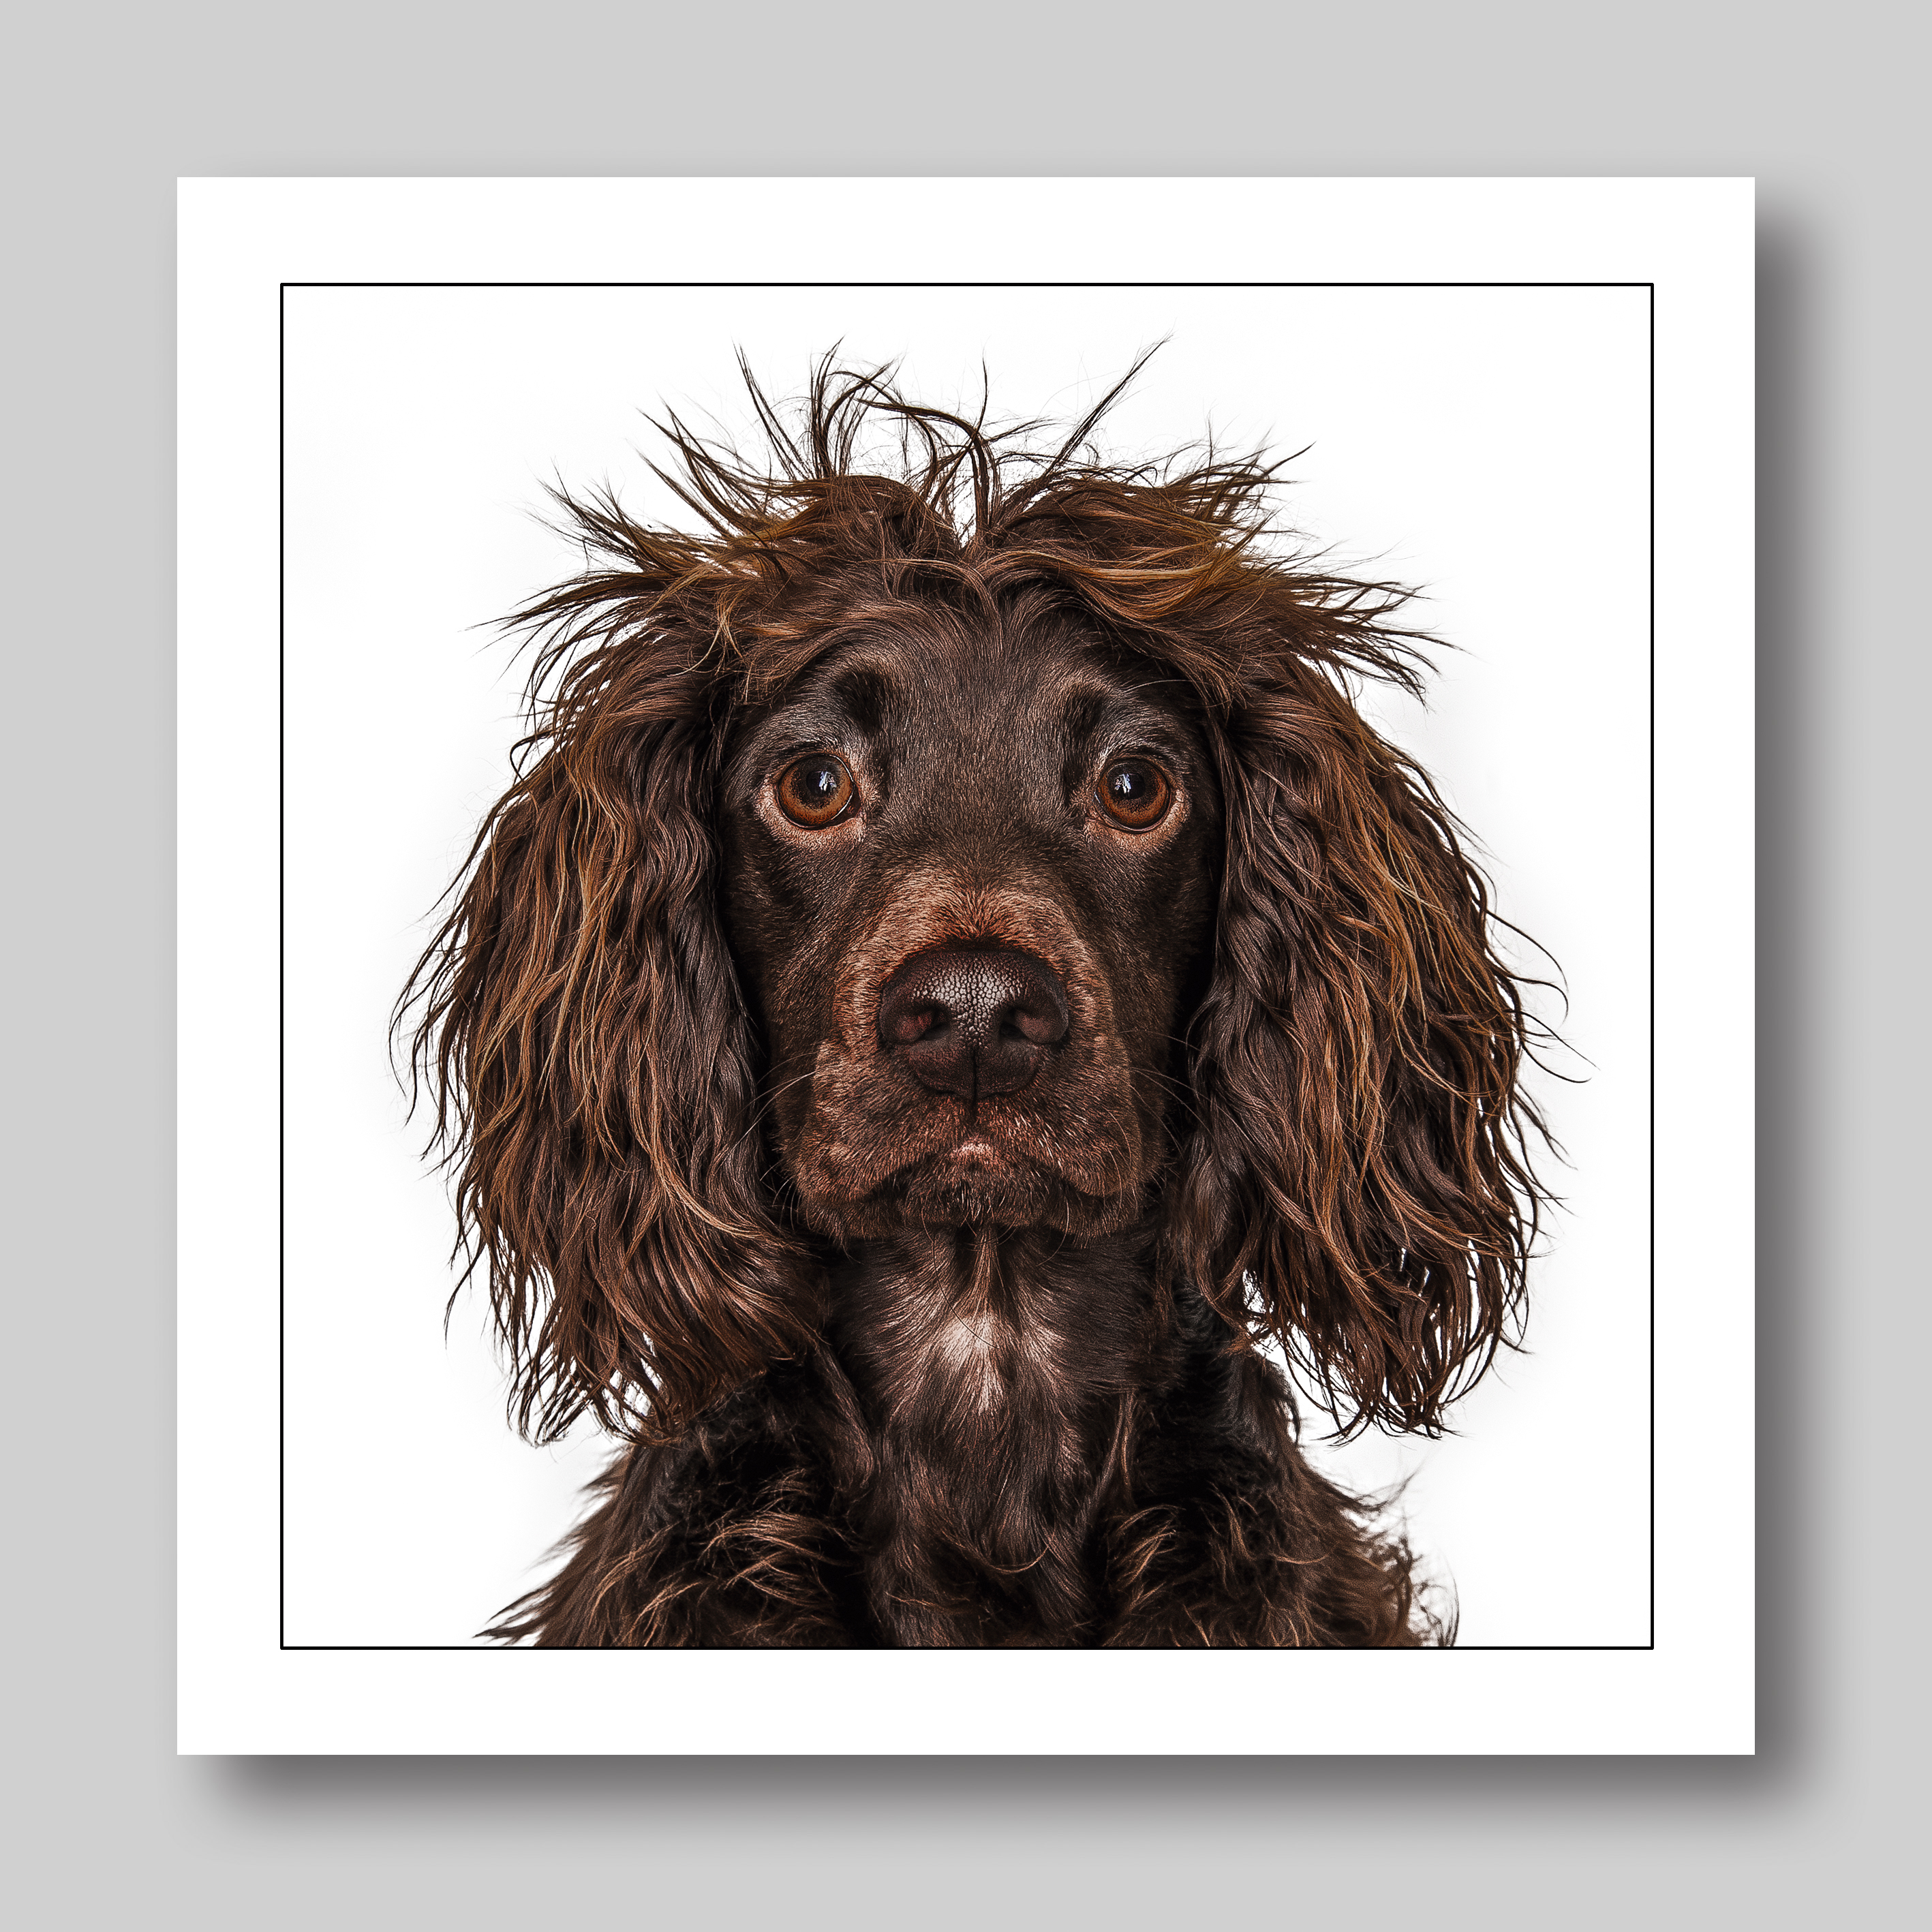 Above: A Working Cocker Spaniel in the Gruff Pawtraits’ card collection. 